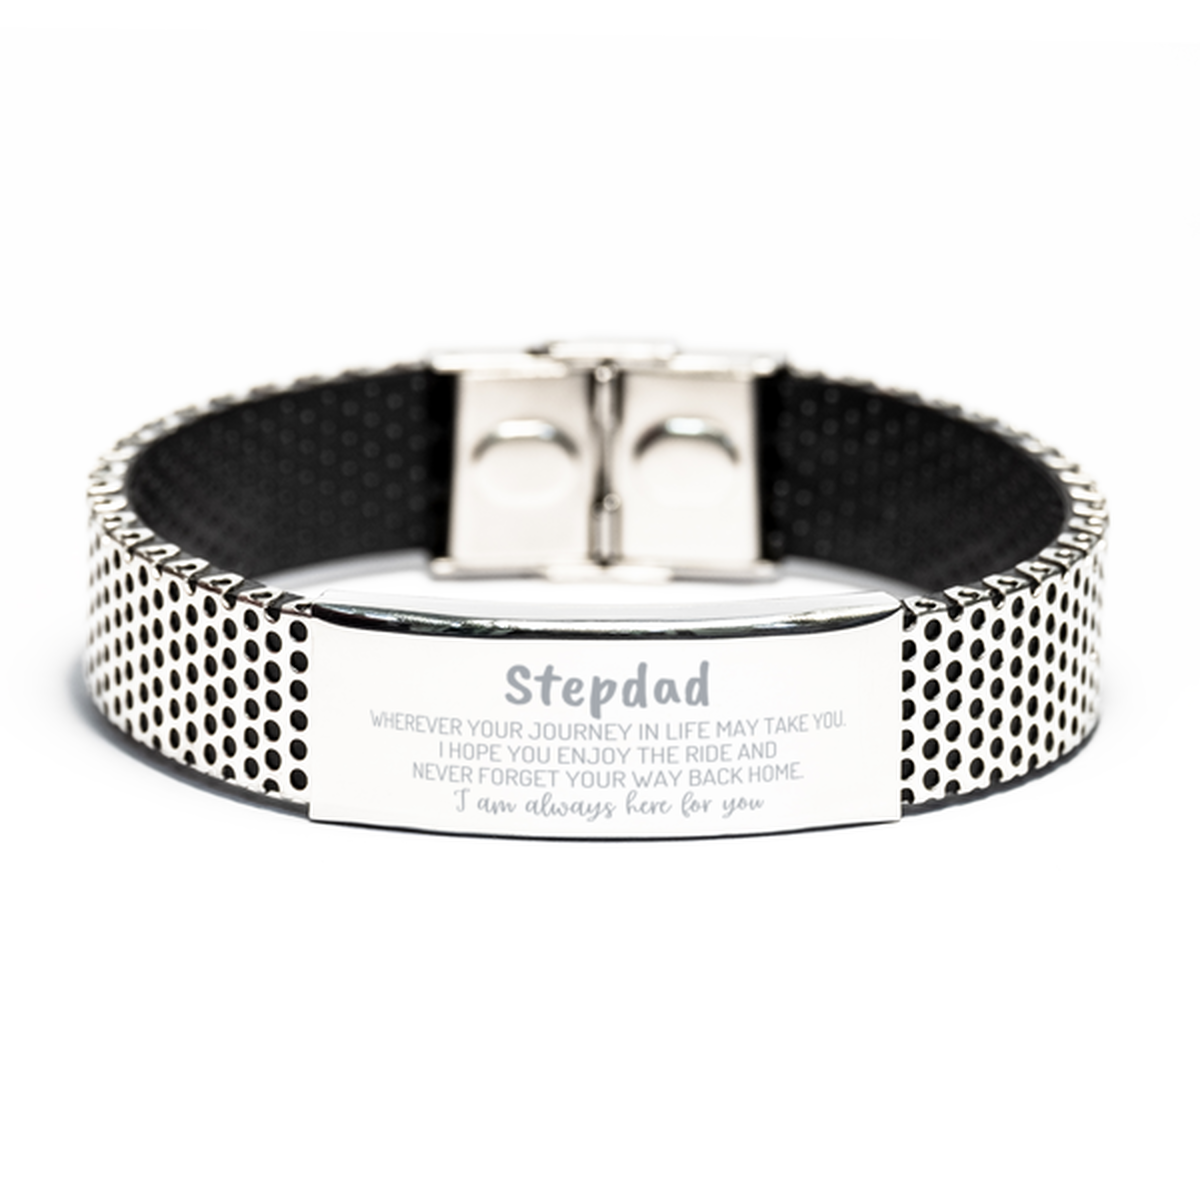 Stepdad wherever your journey in life may take you, I am always here for you Stepdad Stainless Steel Bracelet, Awesome Christmas Gifts For Stepdad, Stepdad Birthday Gifts for Men Women Family Loved One